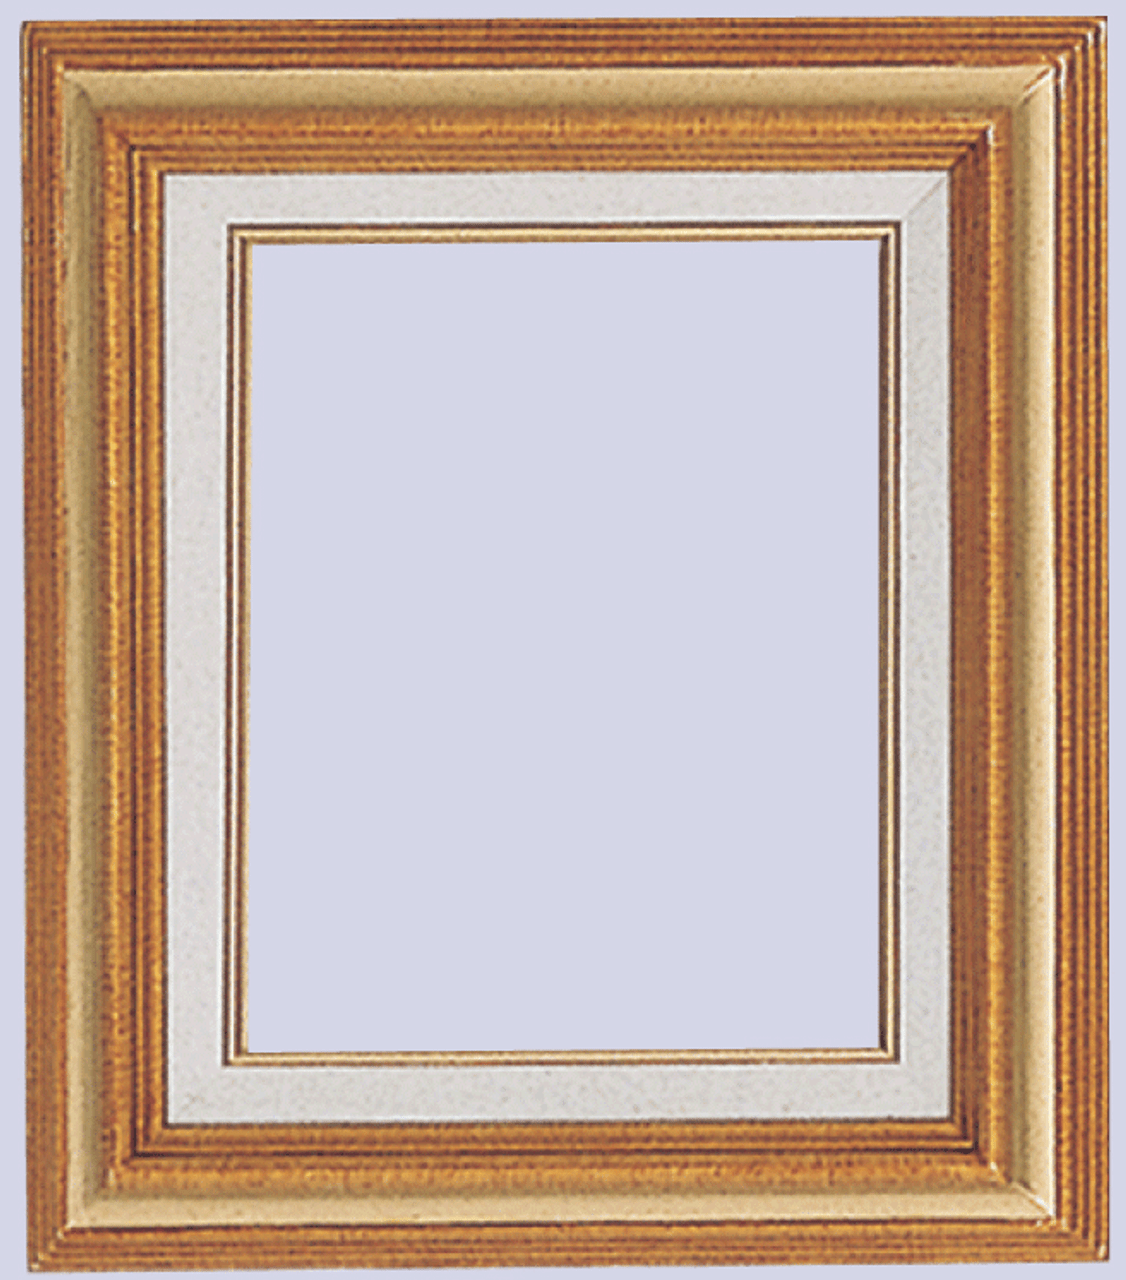 3 Inch Econo Wood Frames With Linen Liners: 40X60*